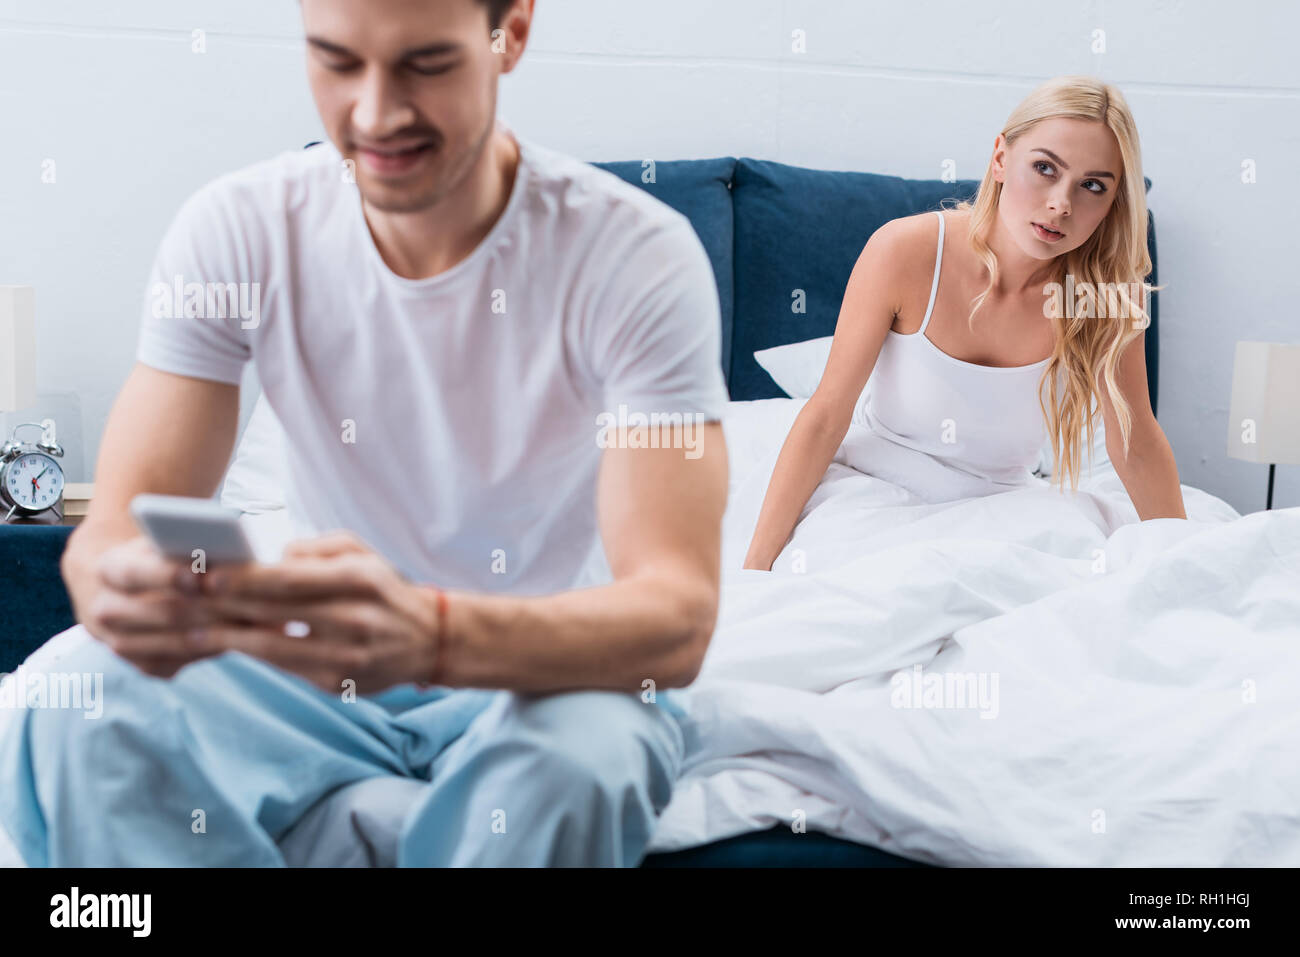 jealous young woman looking at boyfriend using smartphone on foreground in bedroom Stock Photo